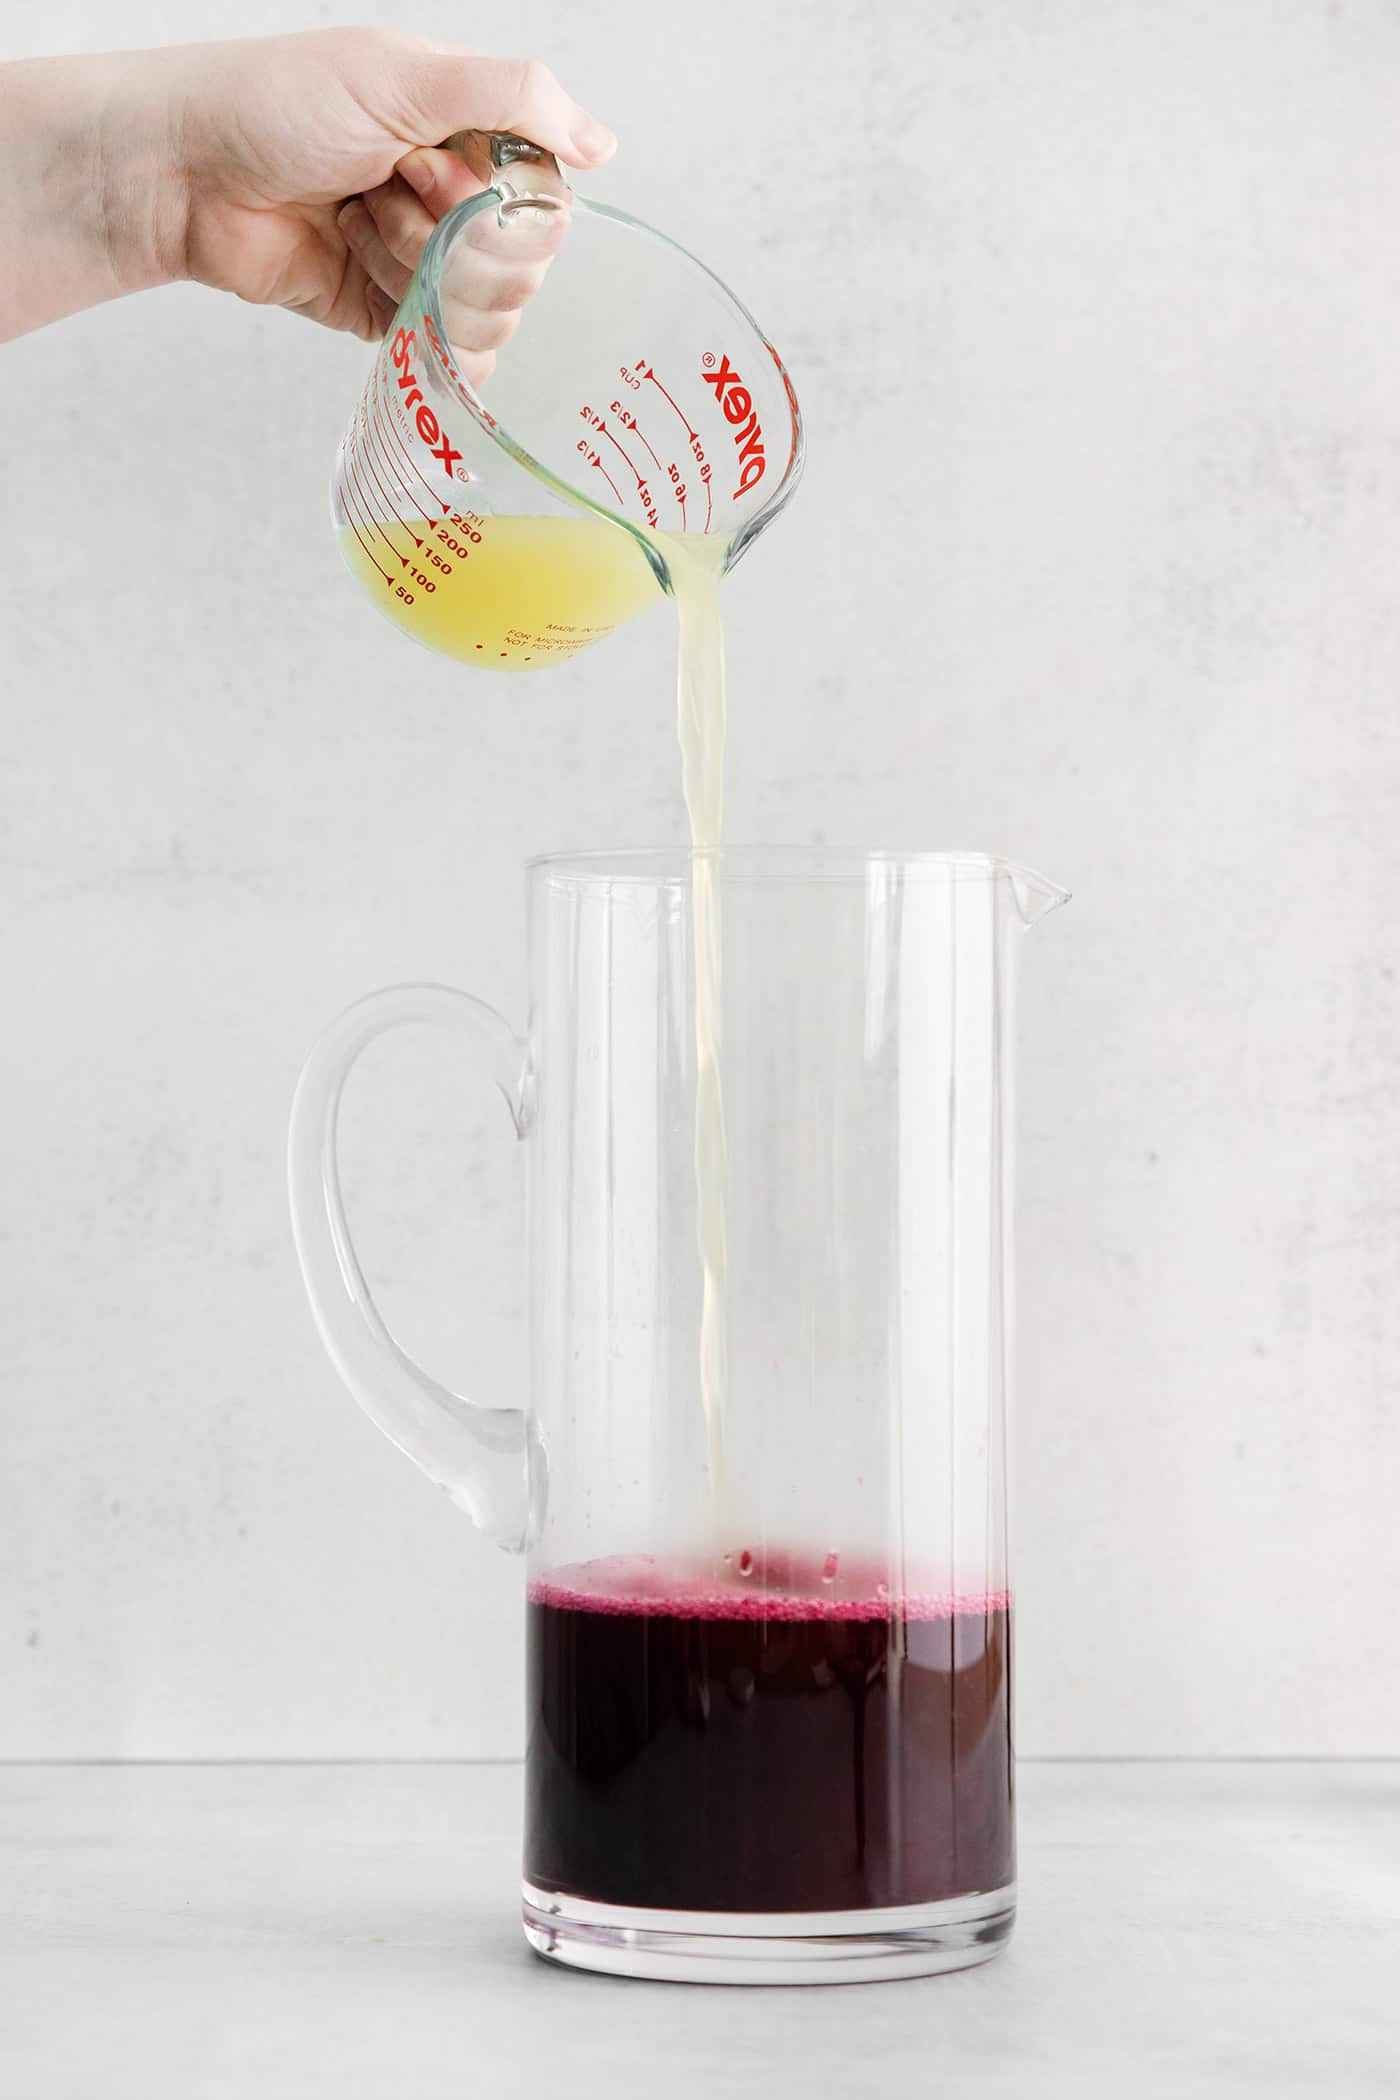 Lemon juice being added to a pitcher with blueberry syrup